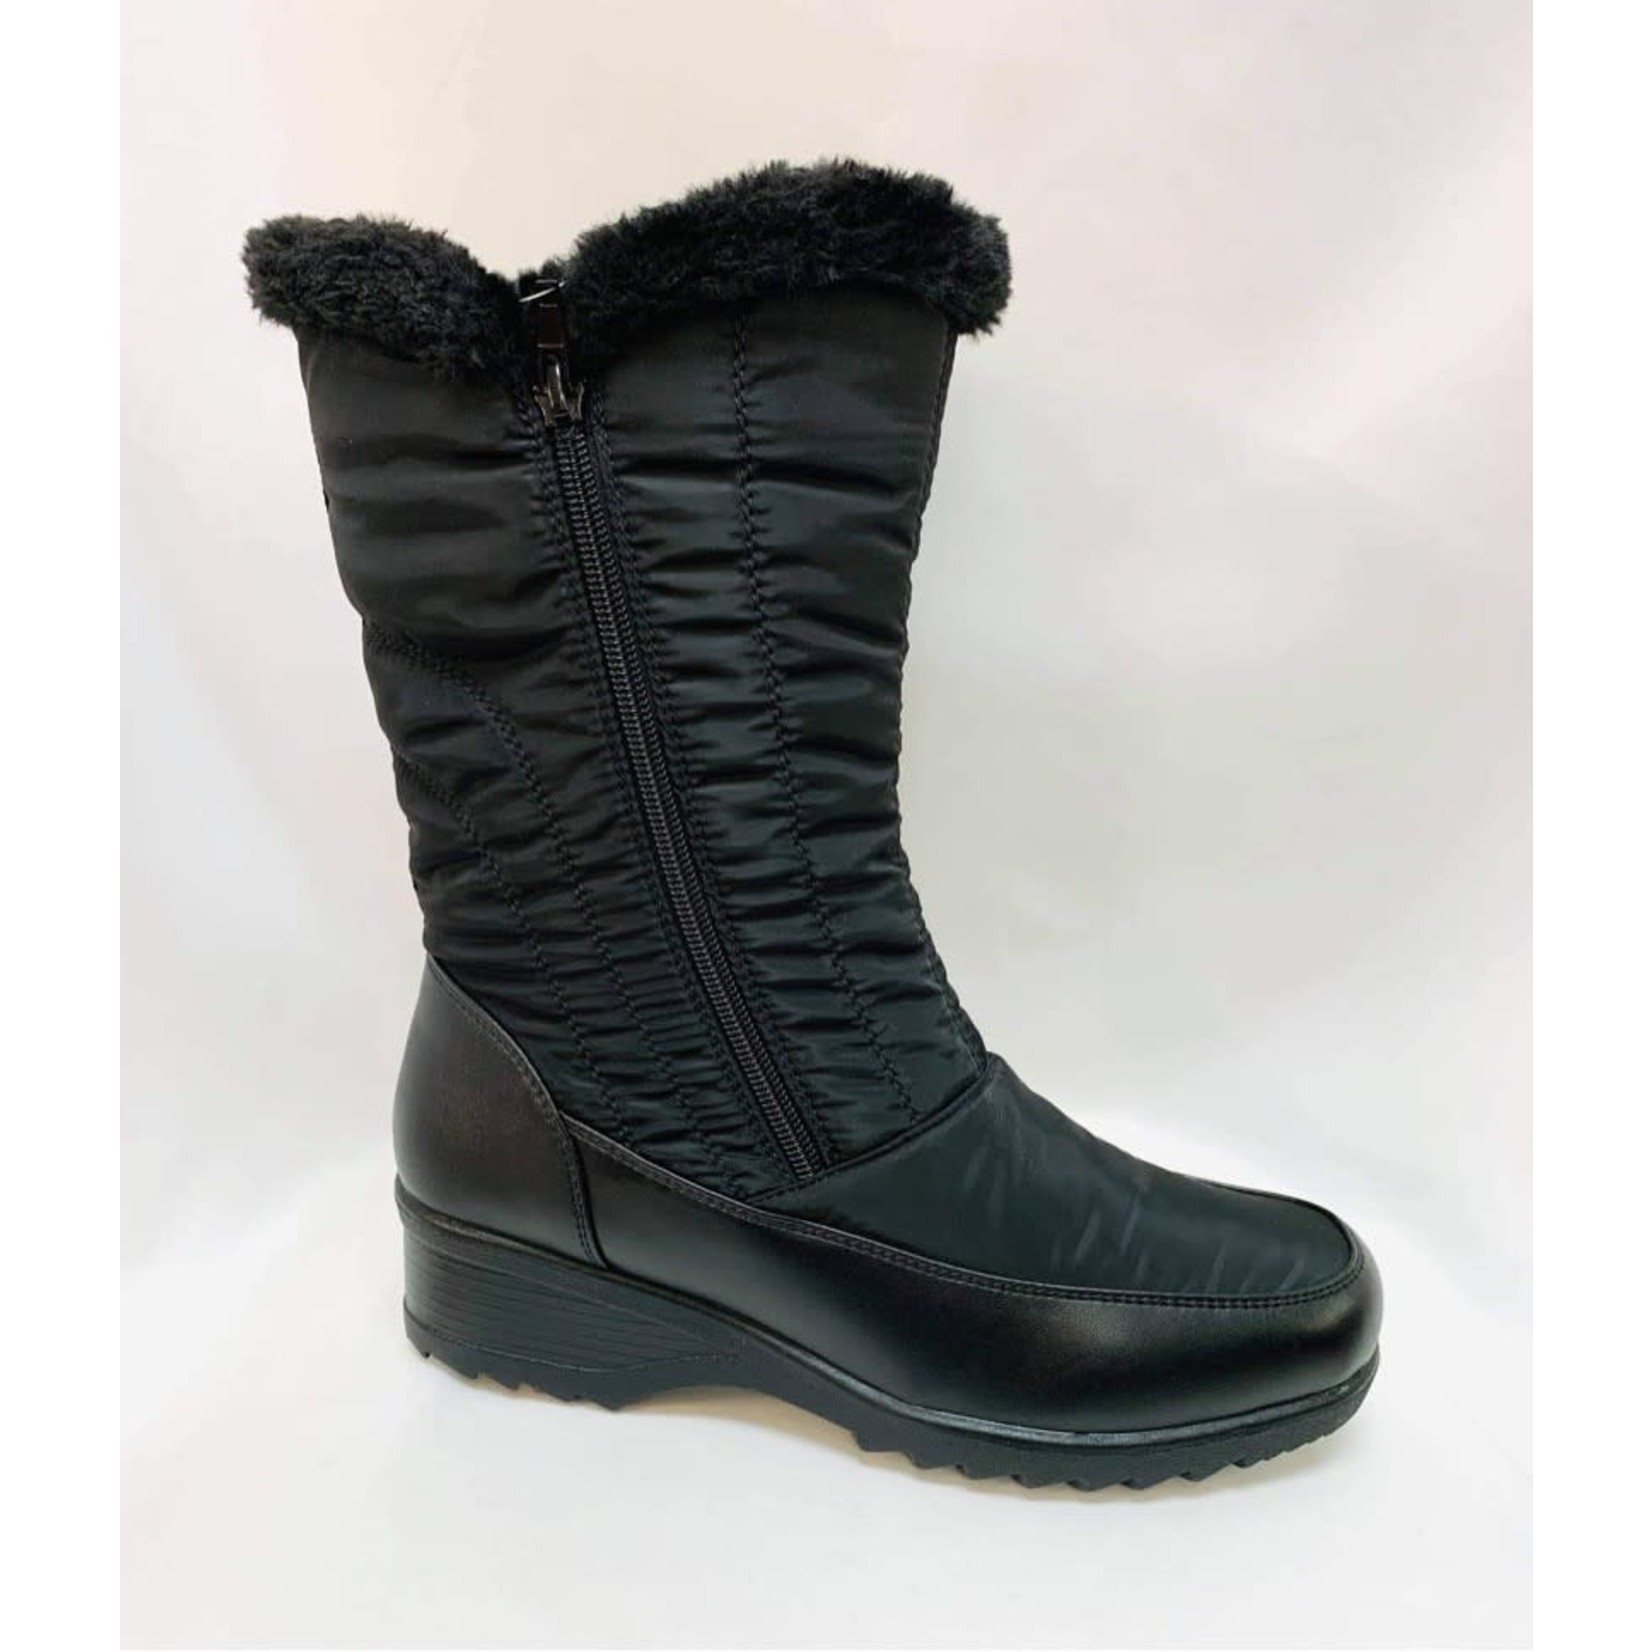 Frontier North Boots